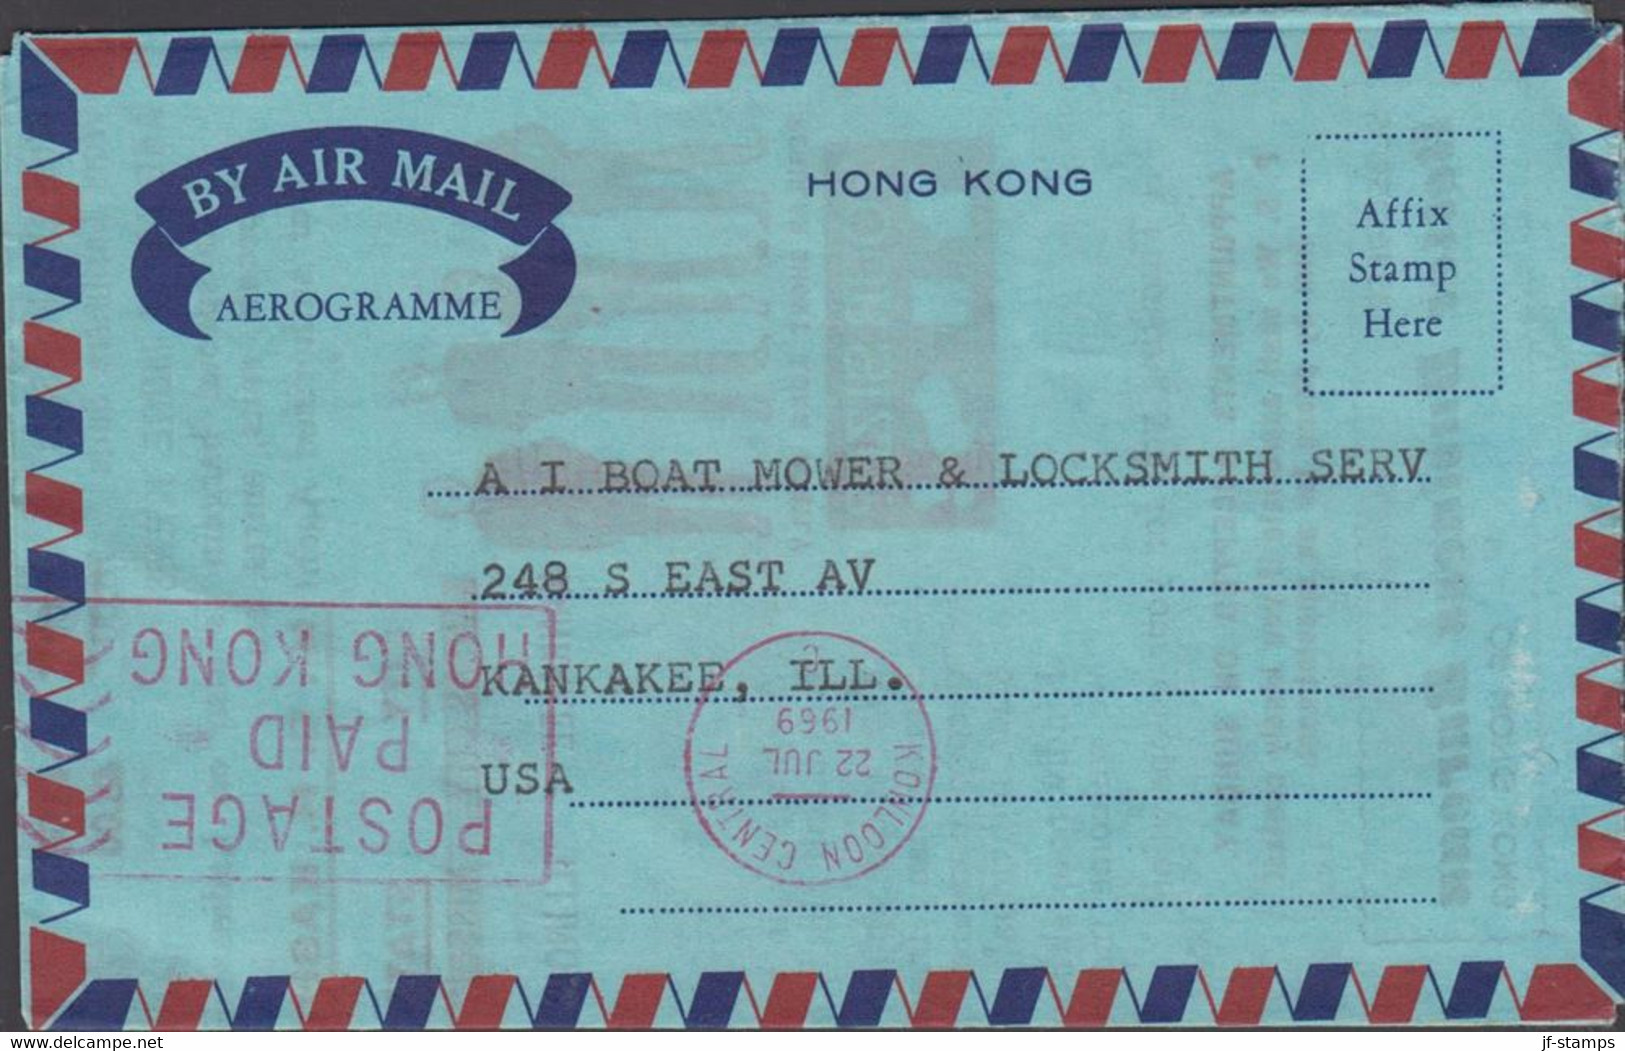 1969. HONG KONG. AEROGRAMME With Red Cancel KOWLOON CENTRAL SS JUL 1969 POSTAGE PAID HONG KONG. Inside Adv... - JF427153 - Postal Stationery